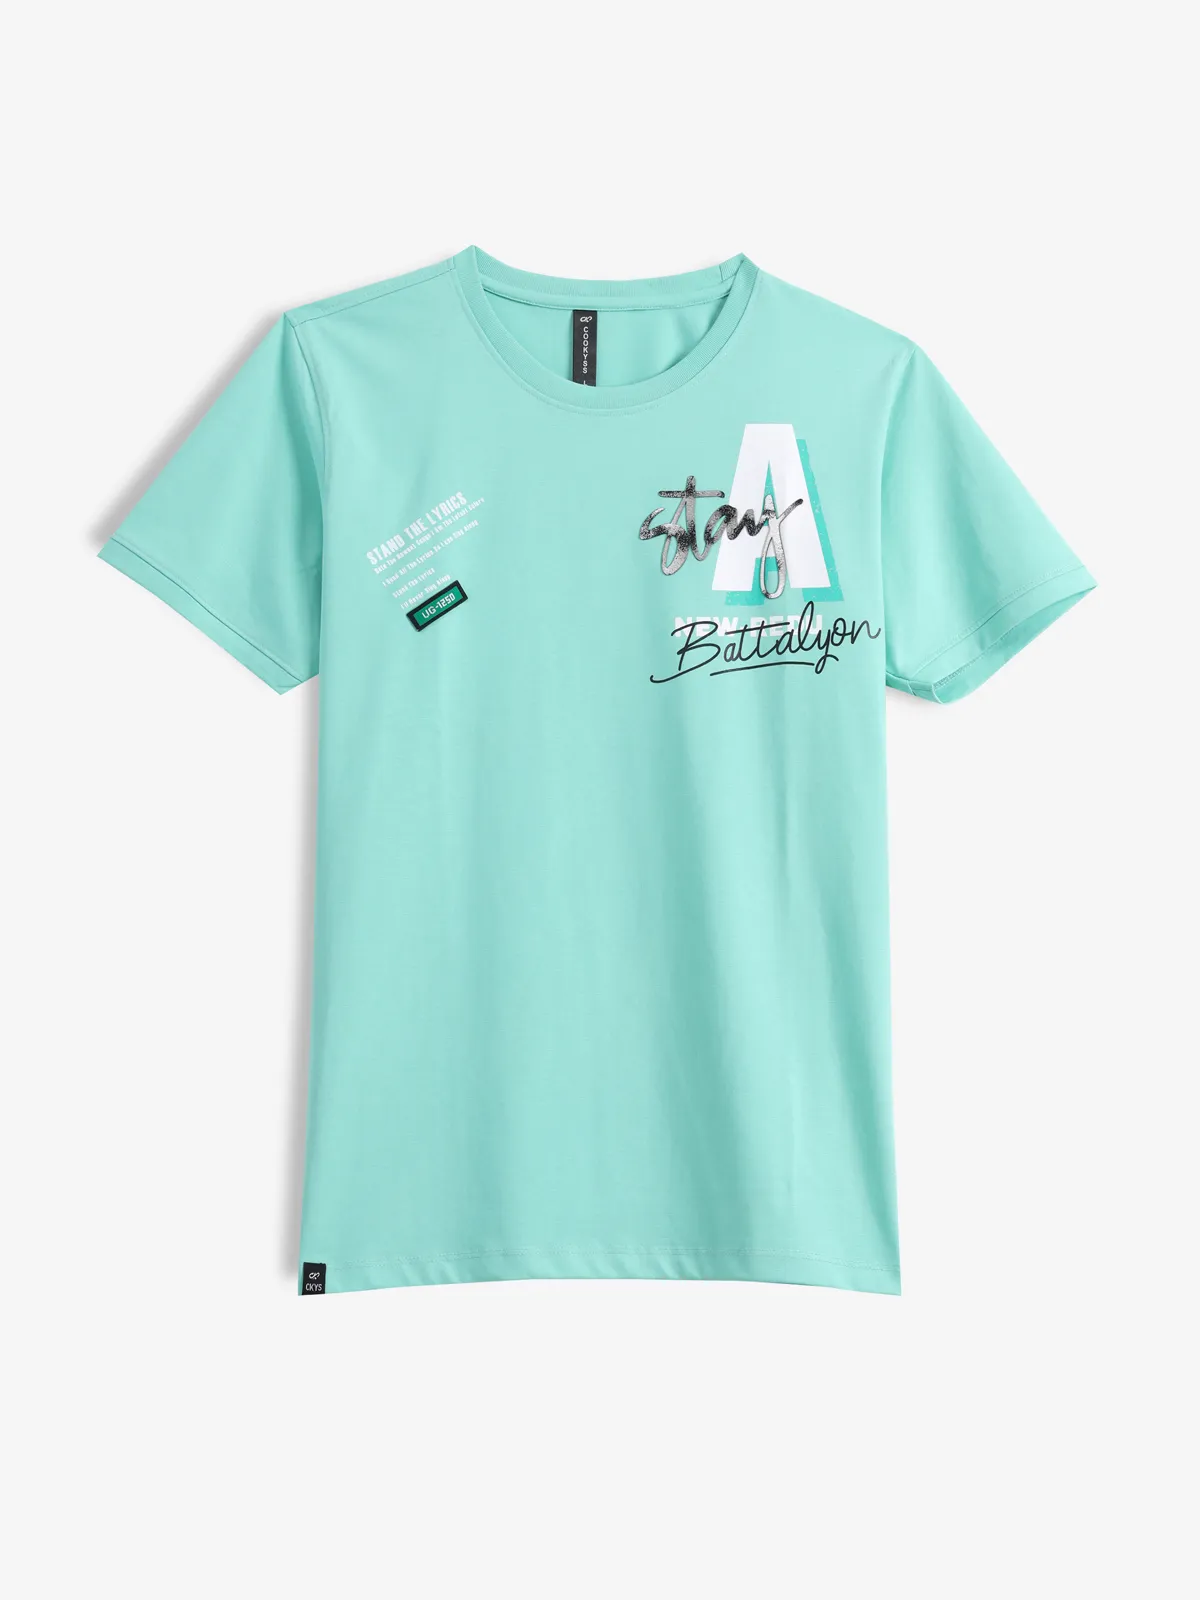 COOKYSS printed mint green t-shirt